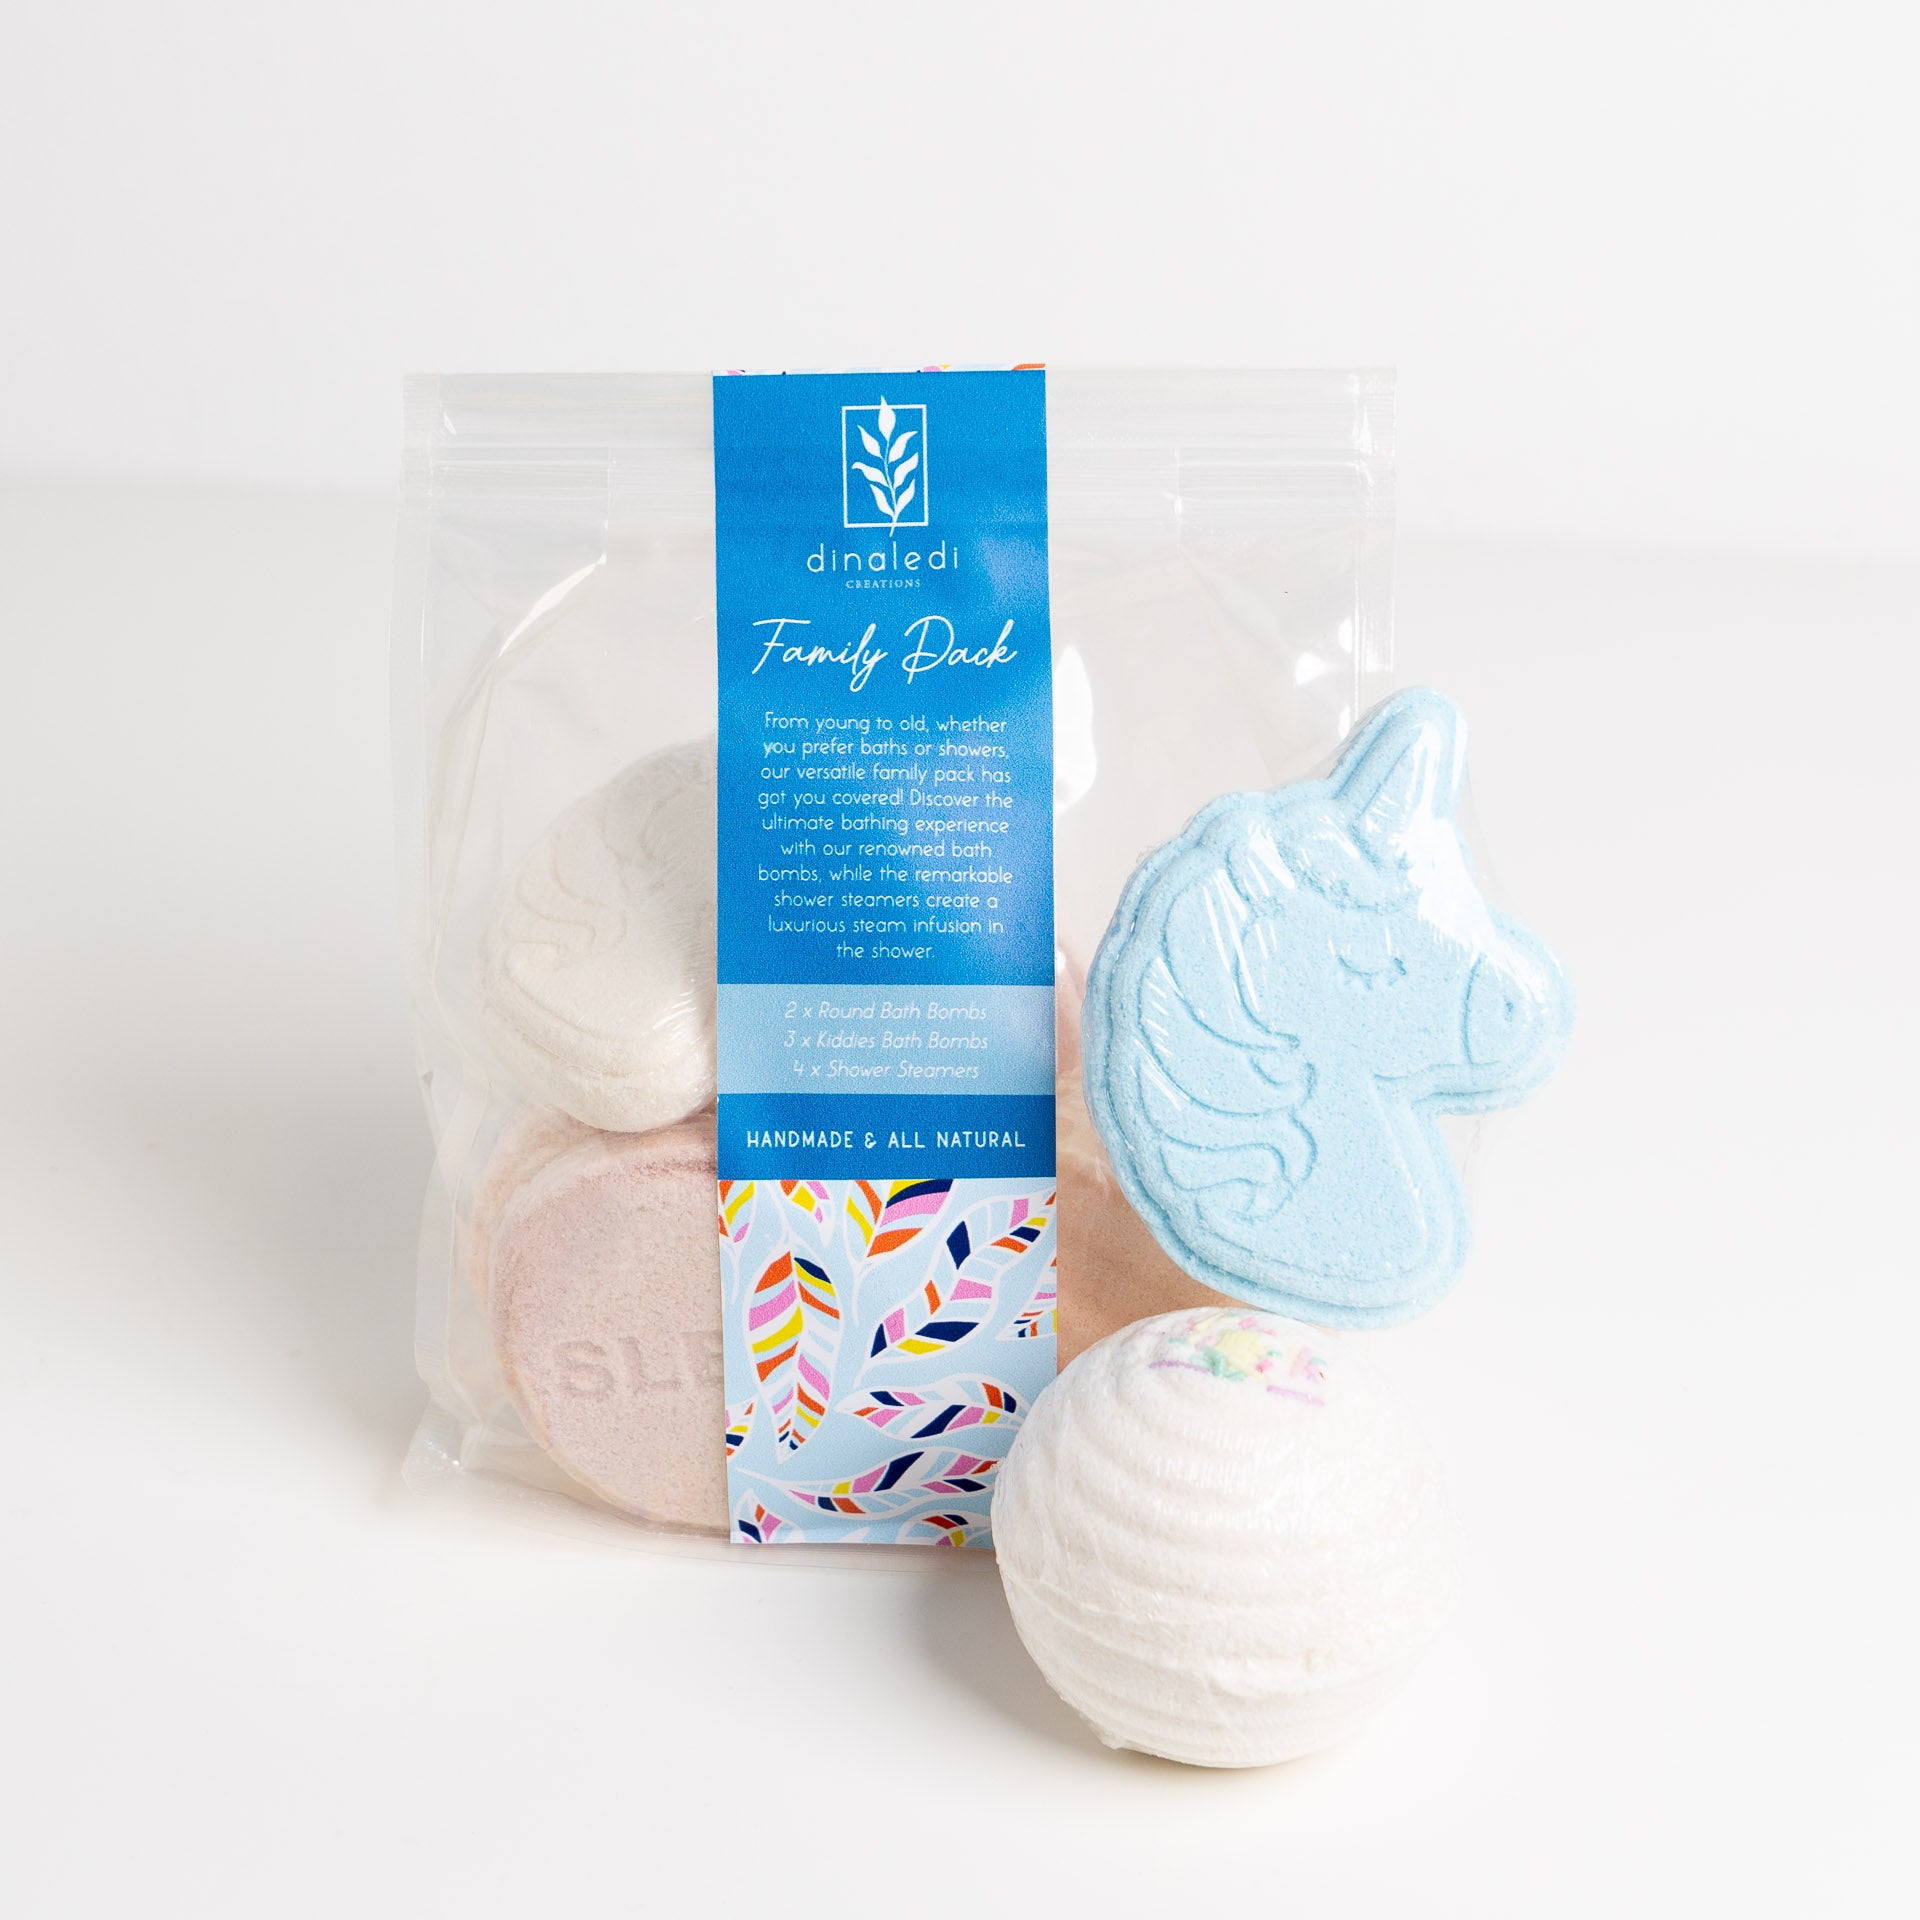 Family Pack of Bath Bombs & Shower Steamers